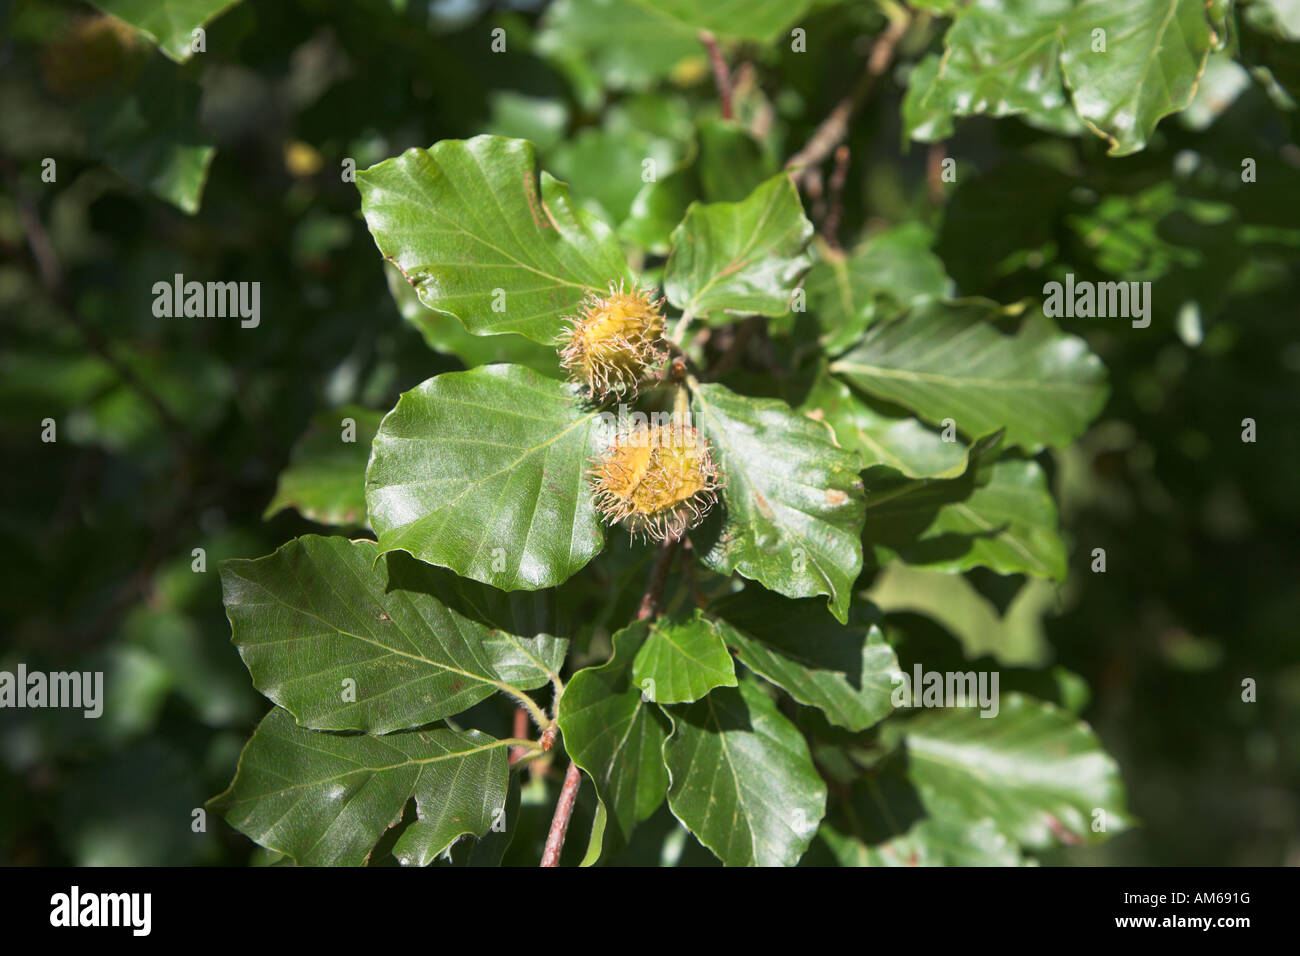 Beech tree fagus sylvatica leaves and nuts close up Stock Photo